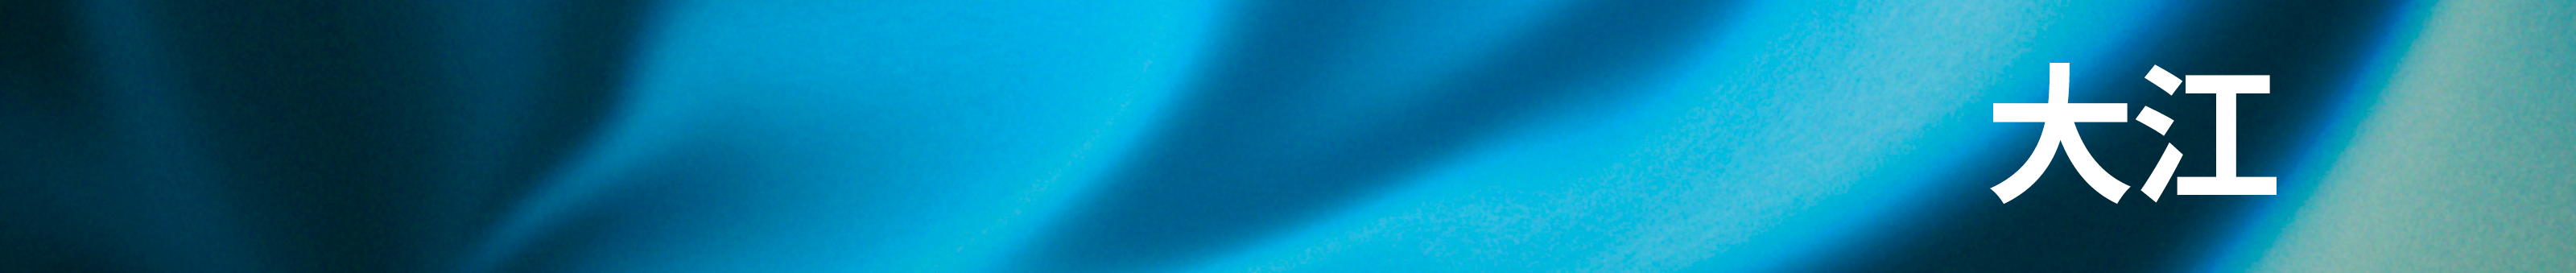 Alessandra Ohoe's profile banner